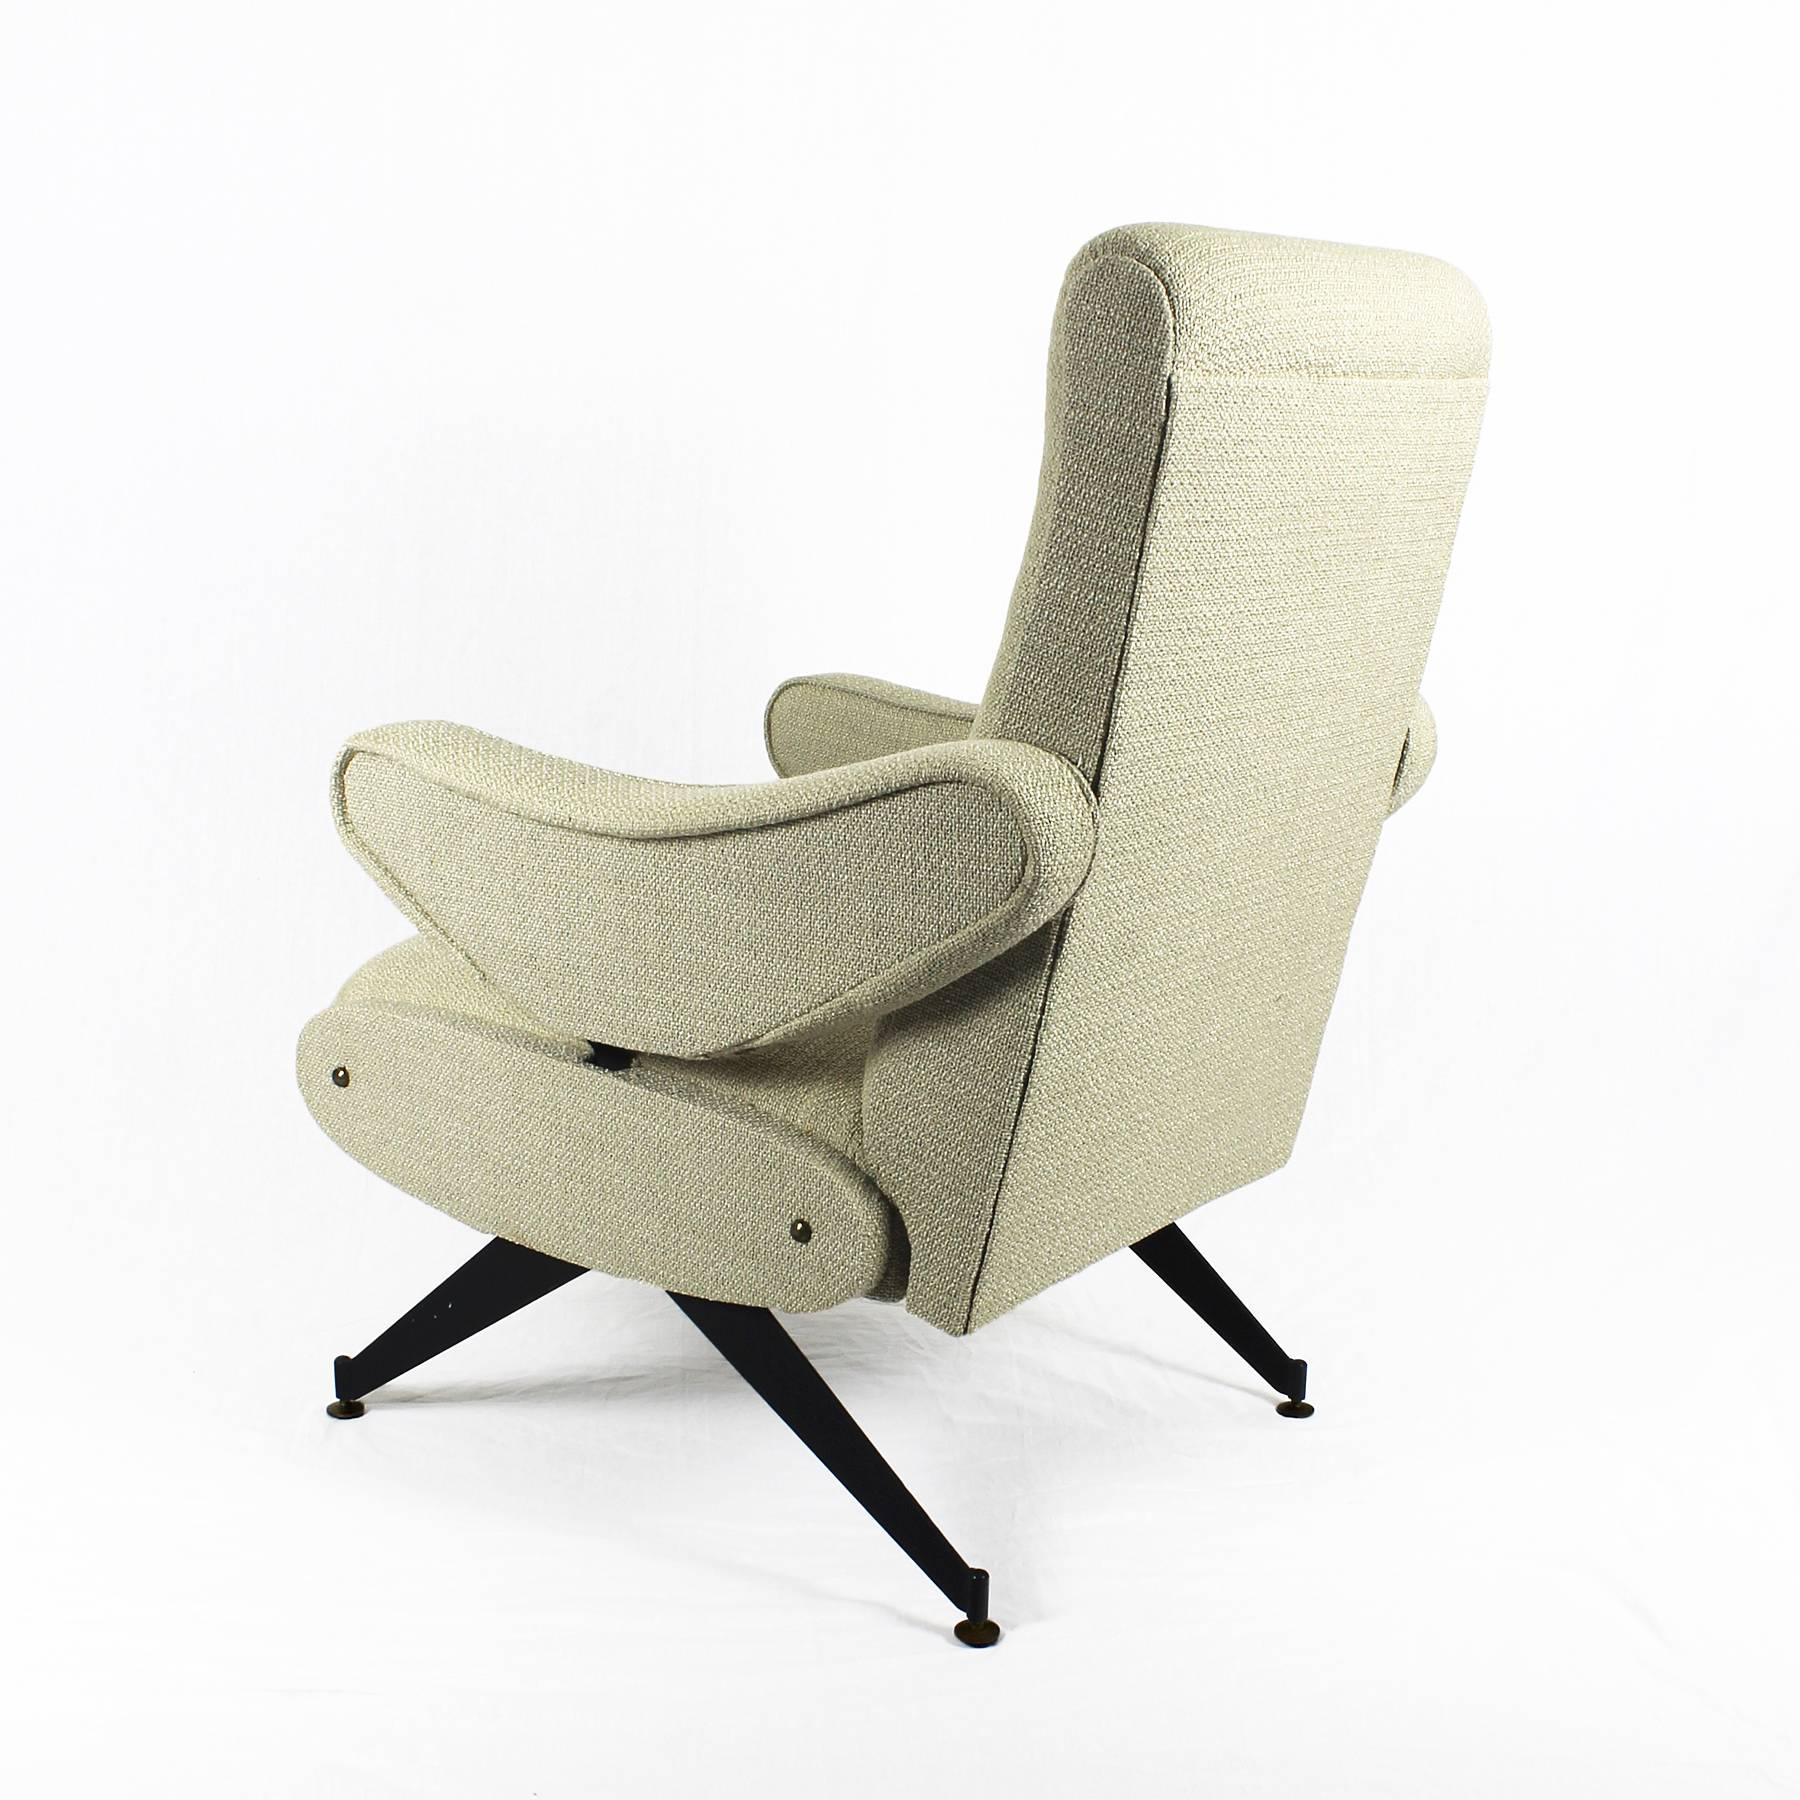 Mid-20th Century Mid-Century Modern Reclinable Armchair by Oscar Gigante, Beige Fabric - Italy For Sale